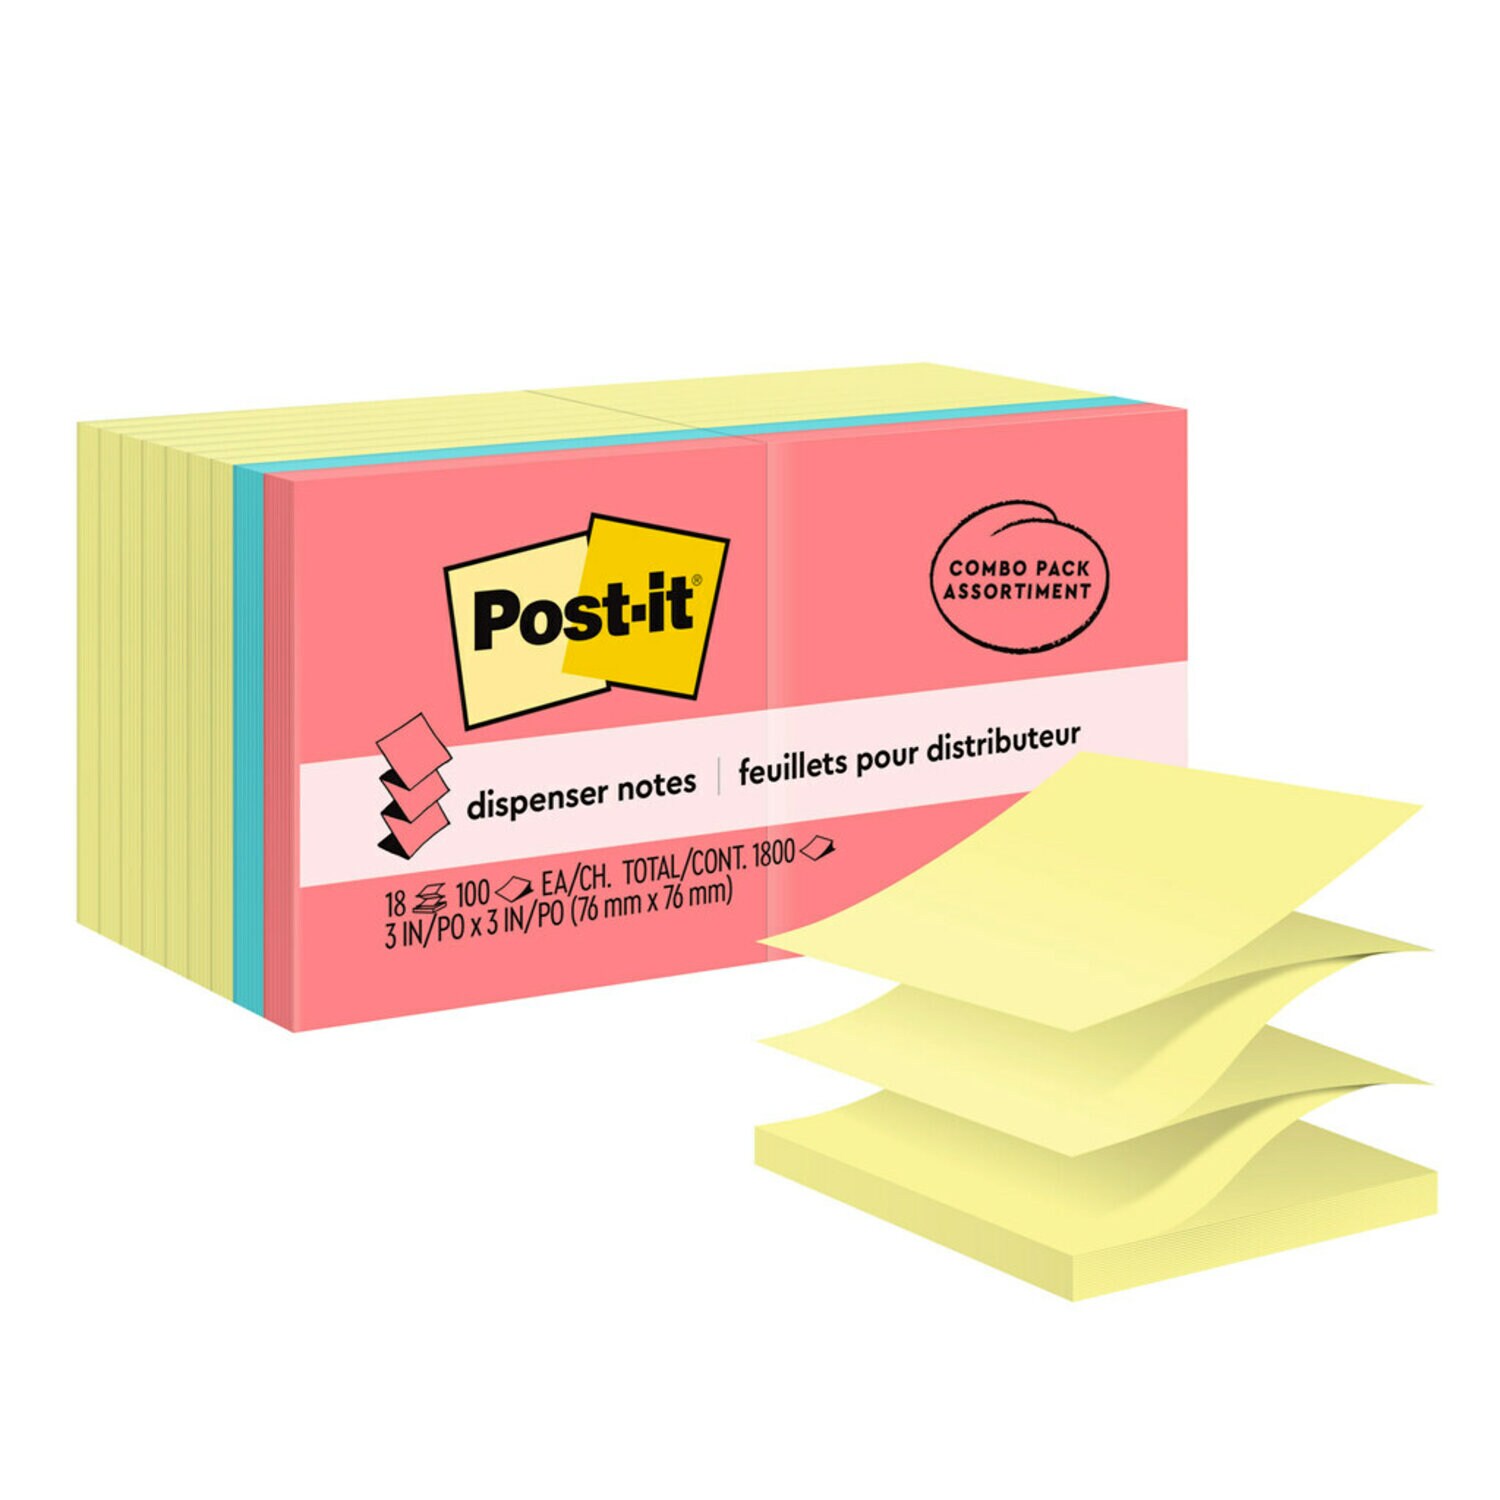 7100097993 - Post-it Pop-up Notes R330-14-4B, 3 in x 3 in (76 mm x 76 mm)